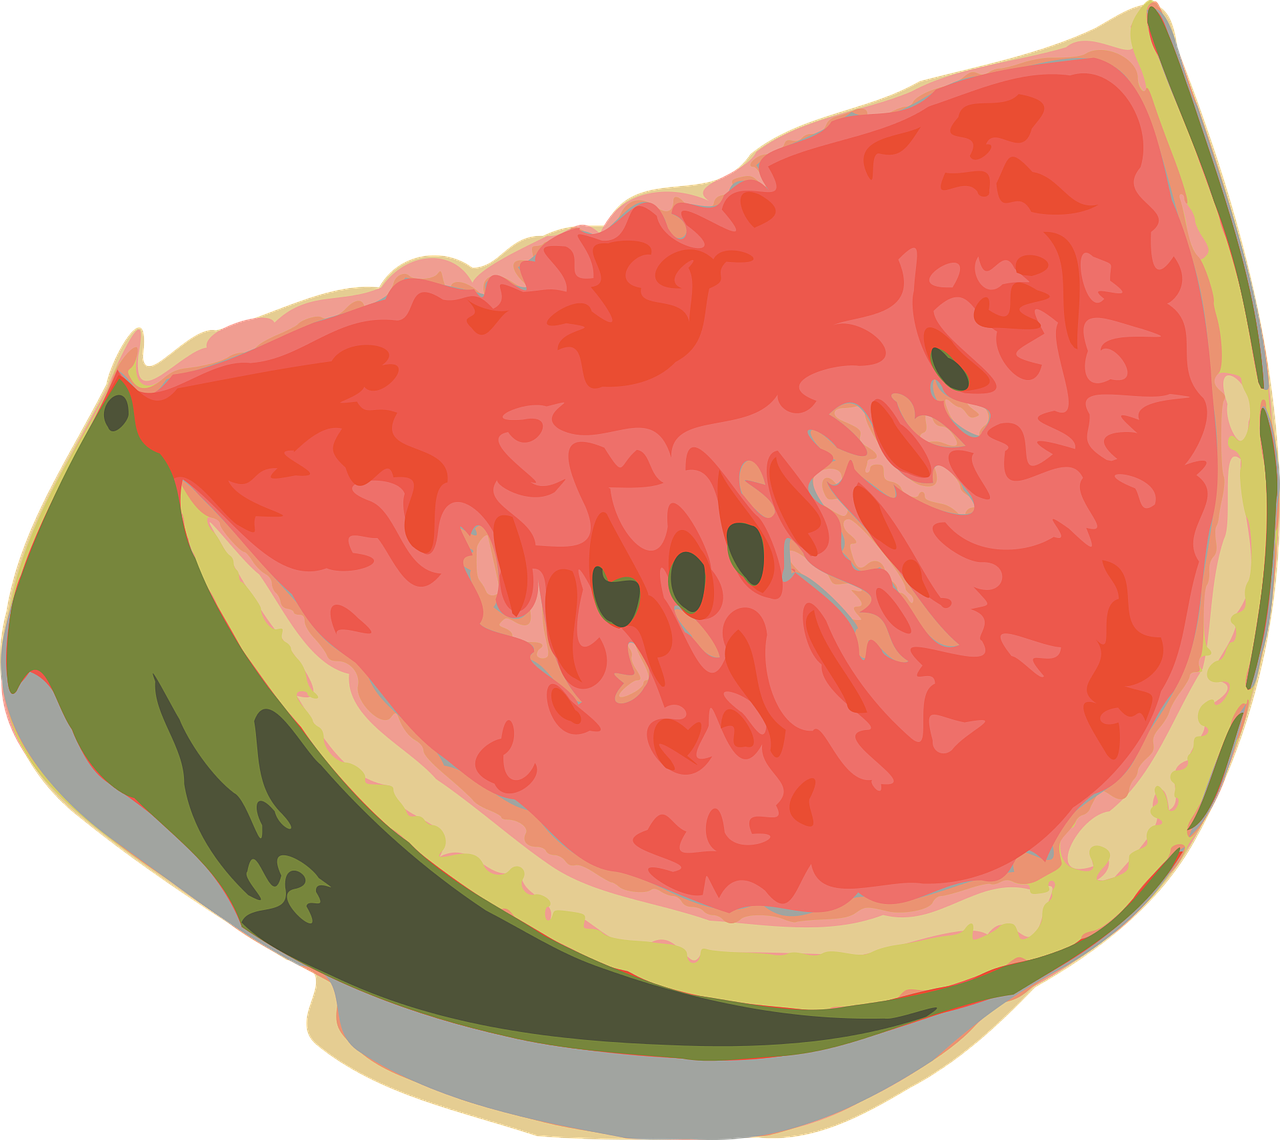 Fruit Picture Red Watermelon Png Image - Watermelon Pdf (1280x1140)